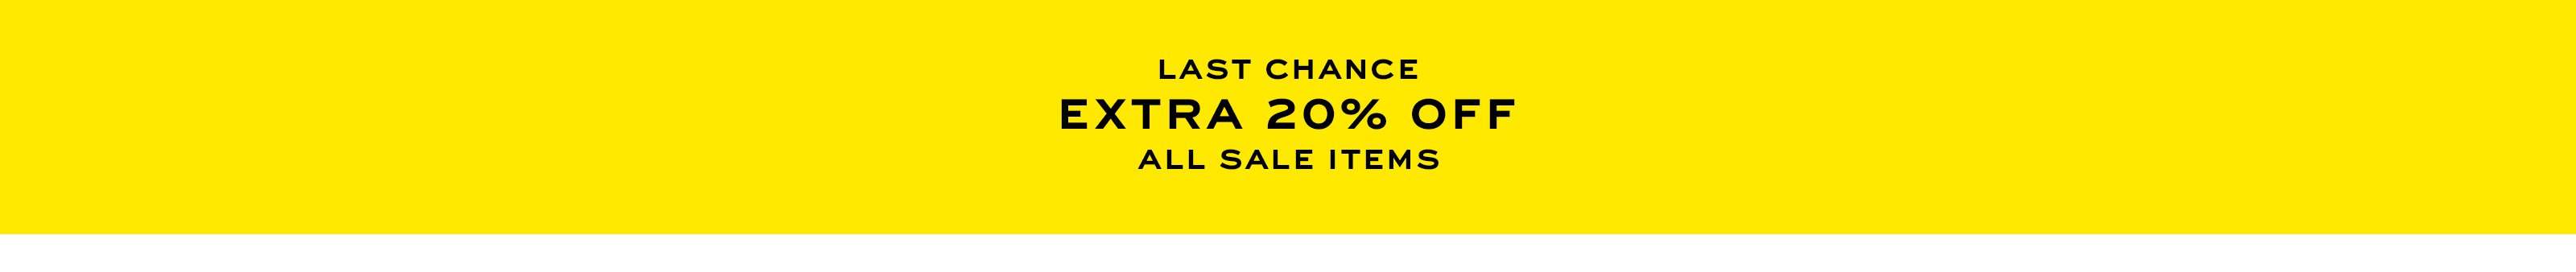 Last chance. Extra 20% off. All sale items.